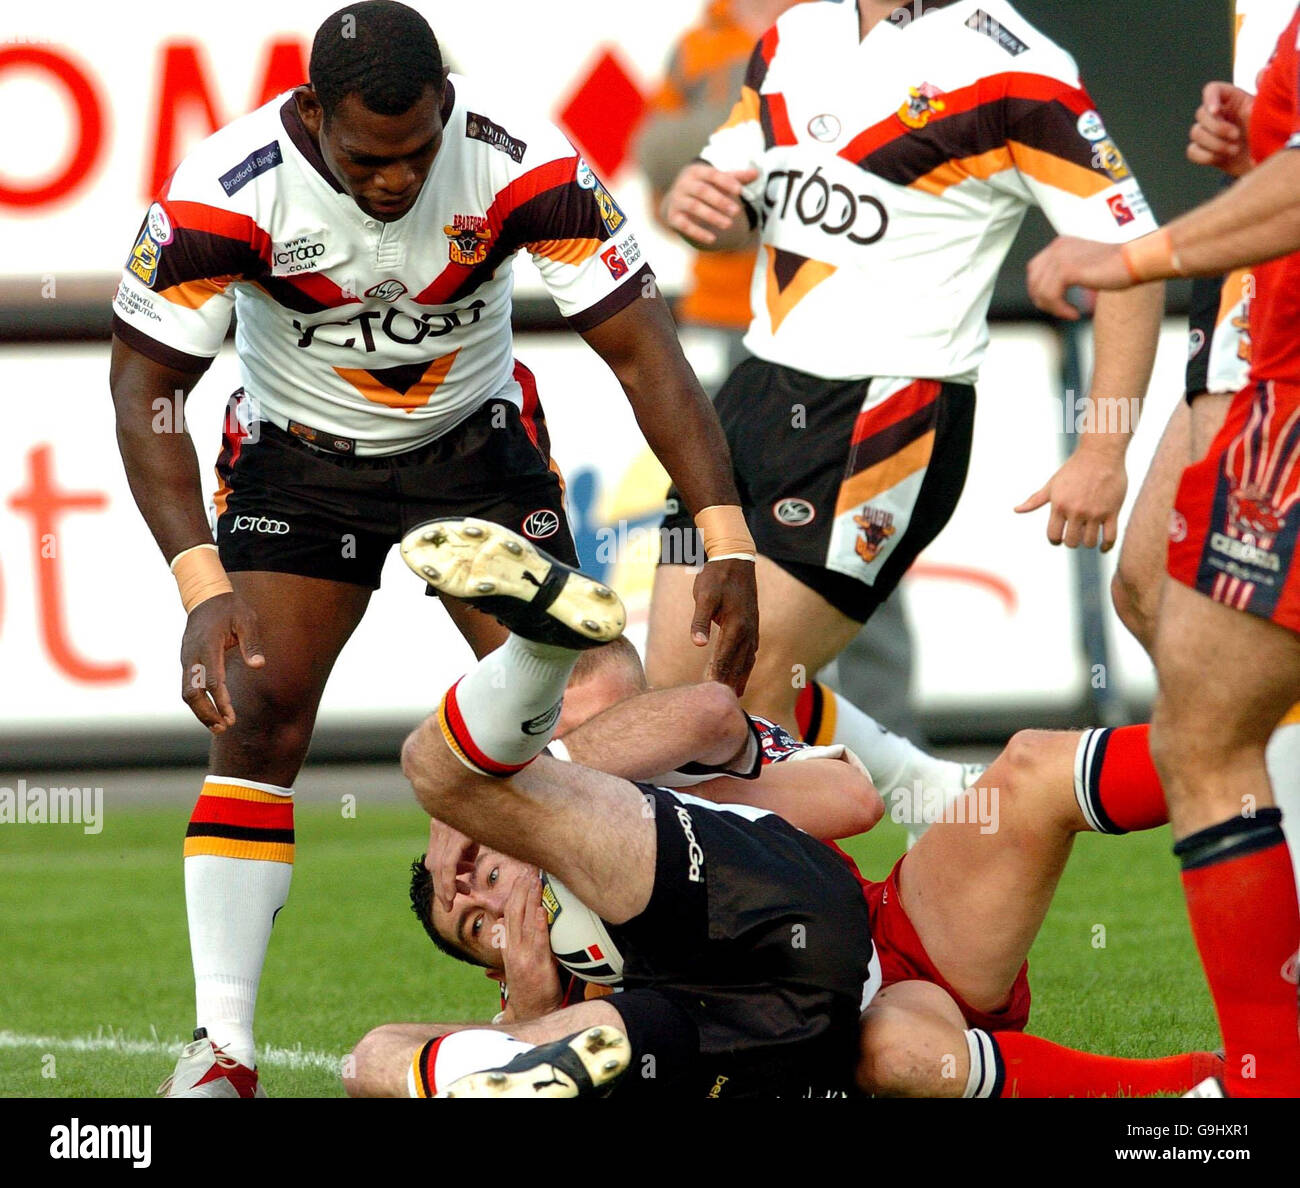 Bradford Bulls' Michael Withers scores against Salford Reds during the Engage Super League play-off at Odsal Stadium, Bradford. Stock Photo